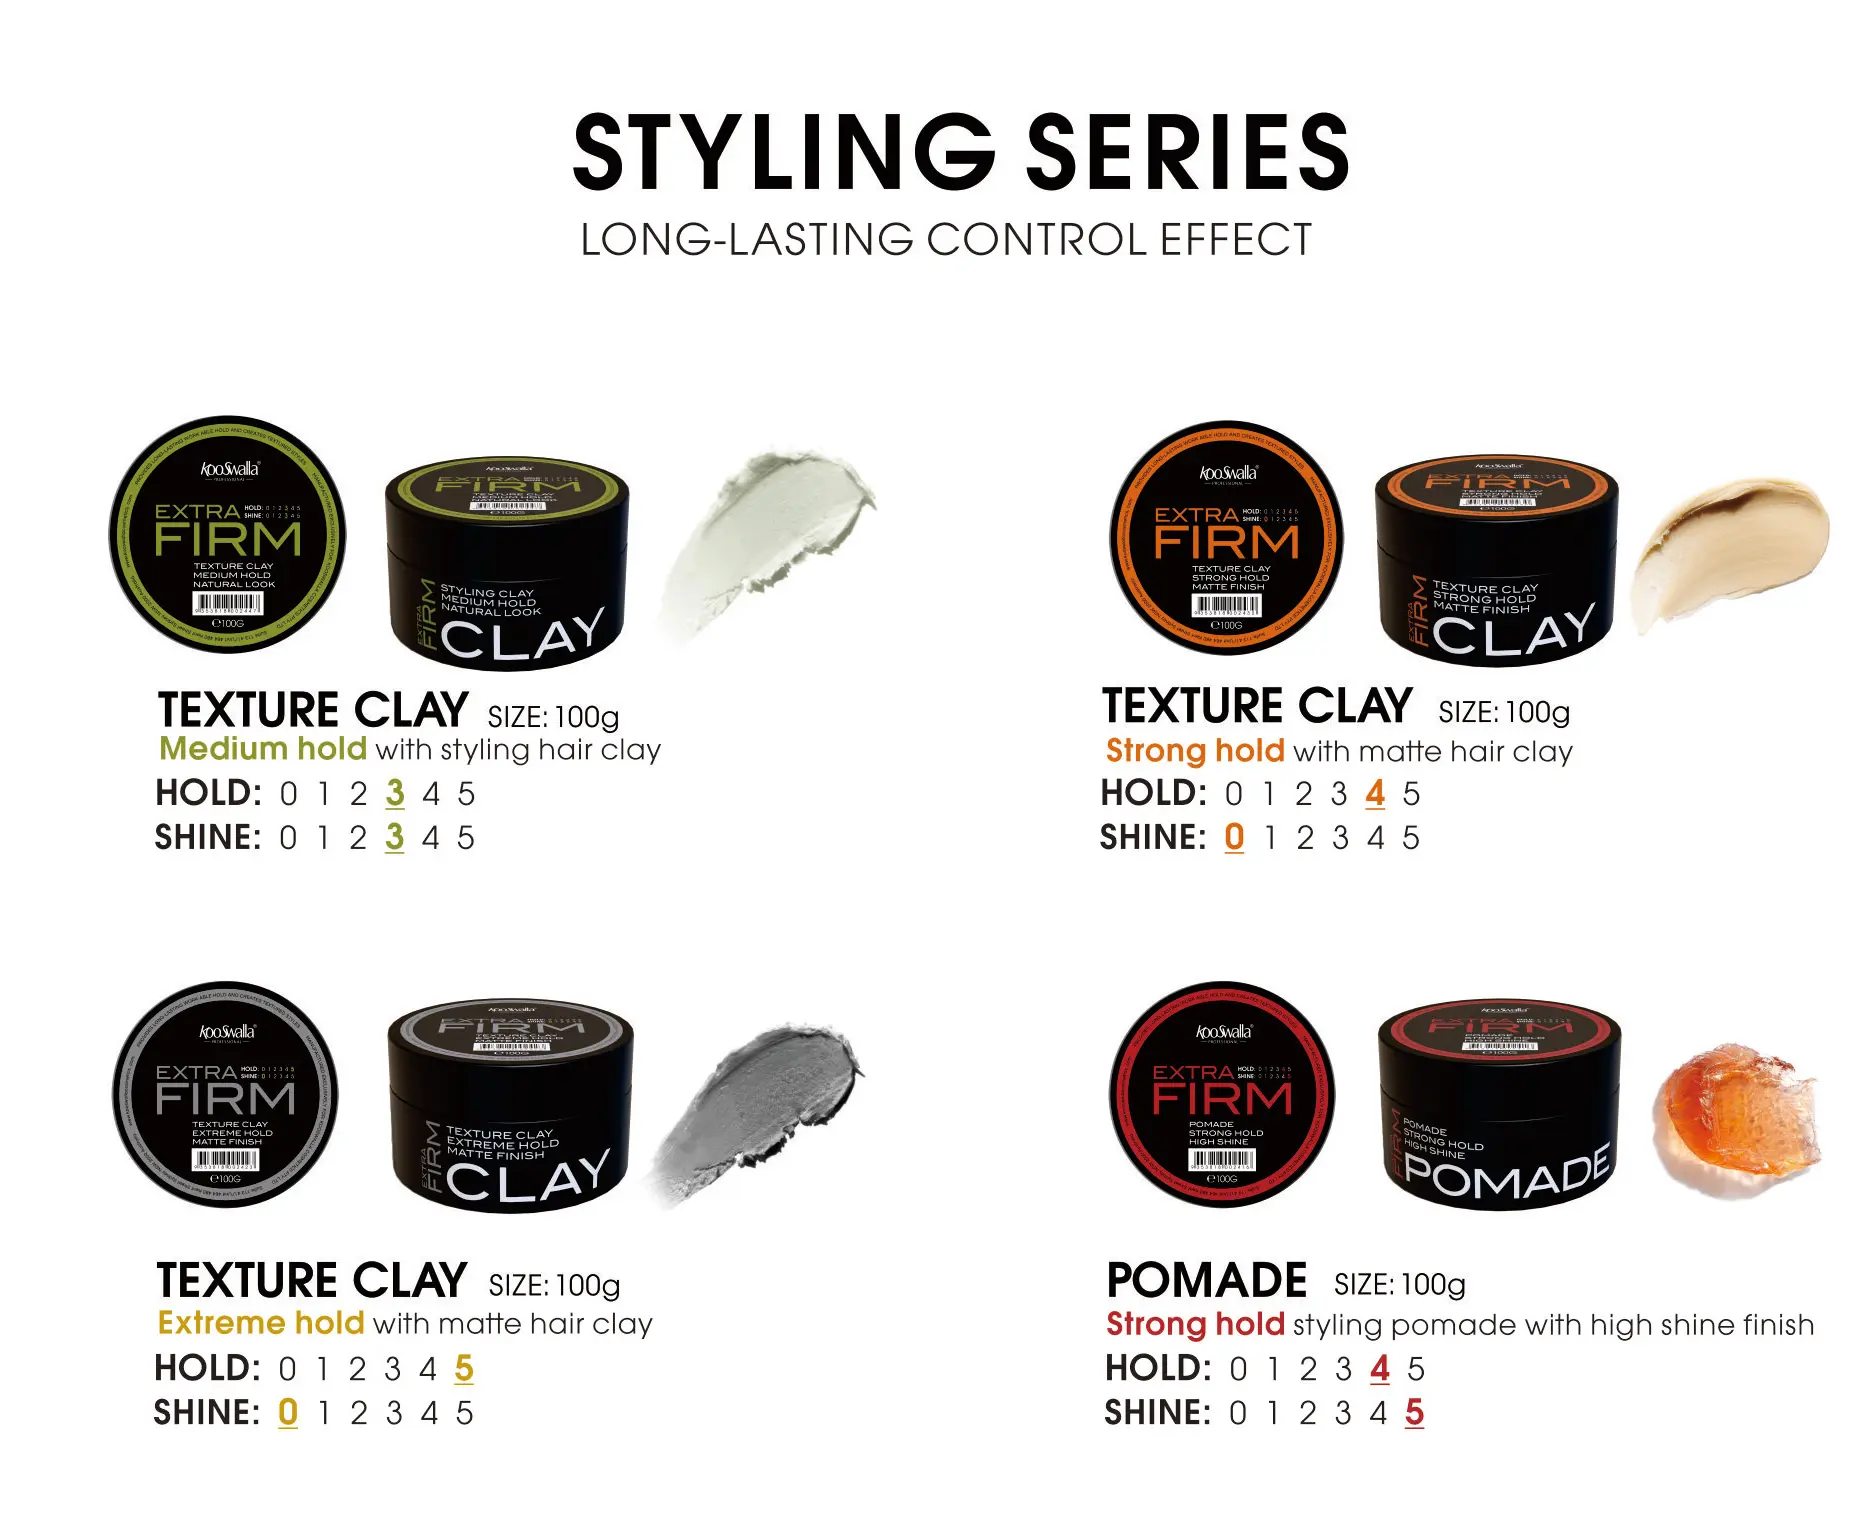 OEM Private Label Bio Männer Haar Pomade Strong Hold Haars tyling Produkte Haar wachs Pomade